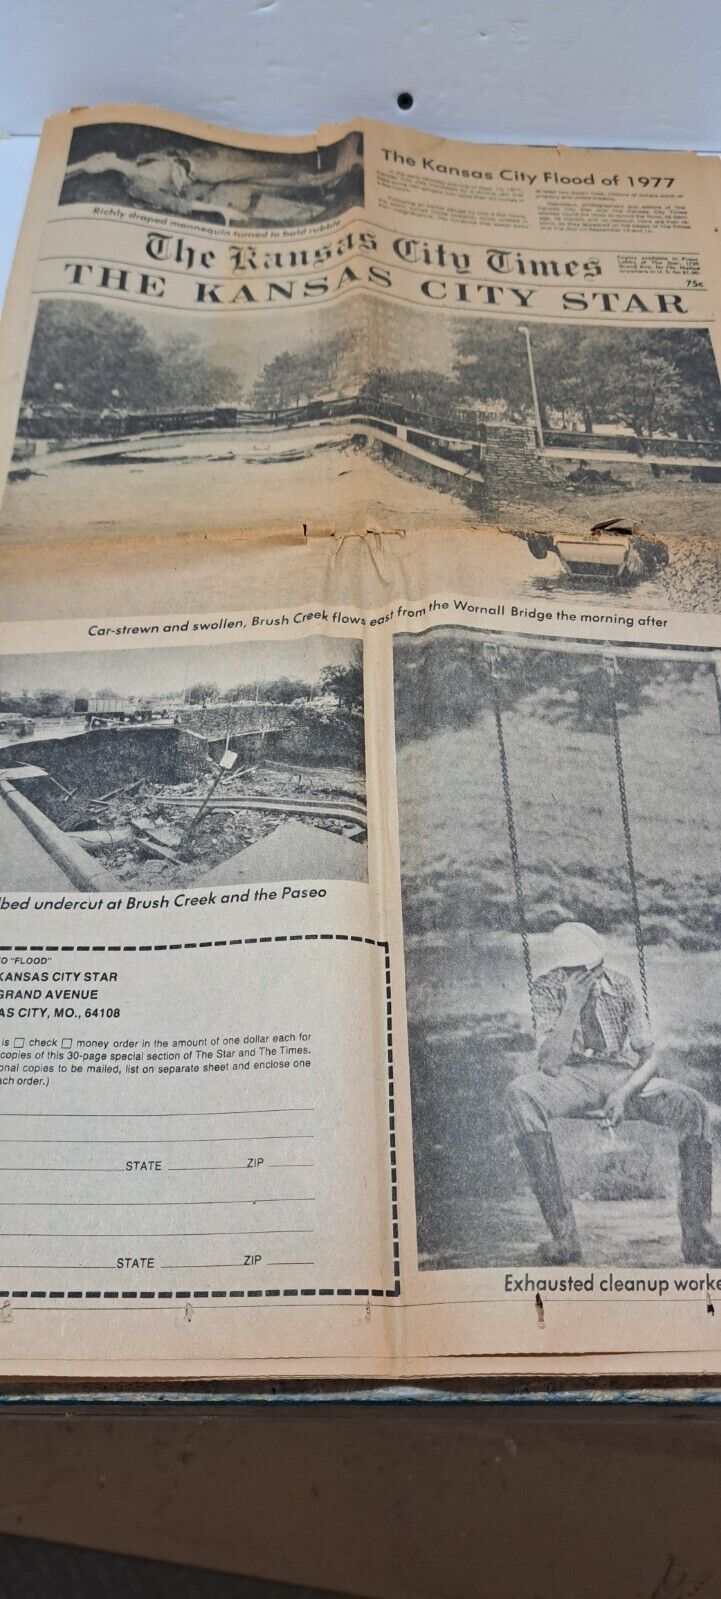 Kanas city Star 14 Sep 1977 some damage to the front page